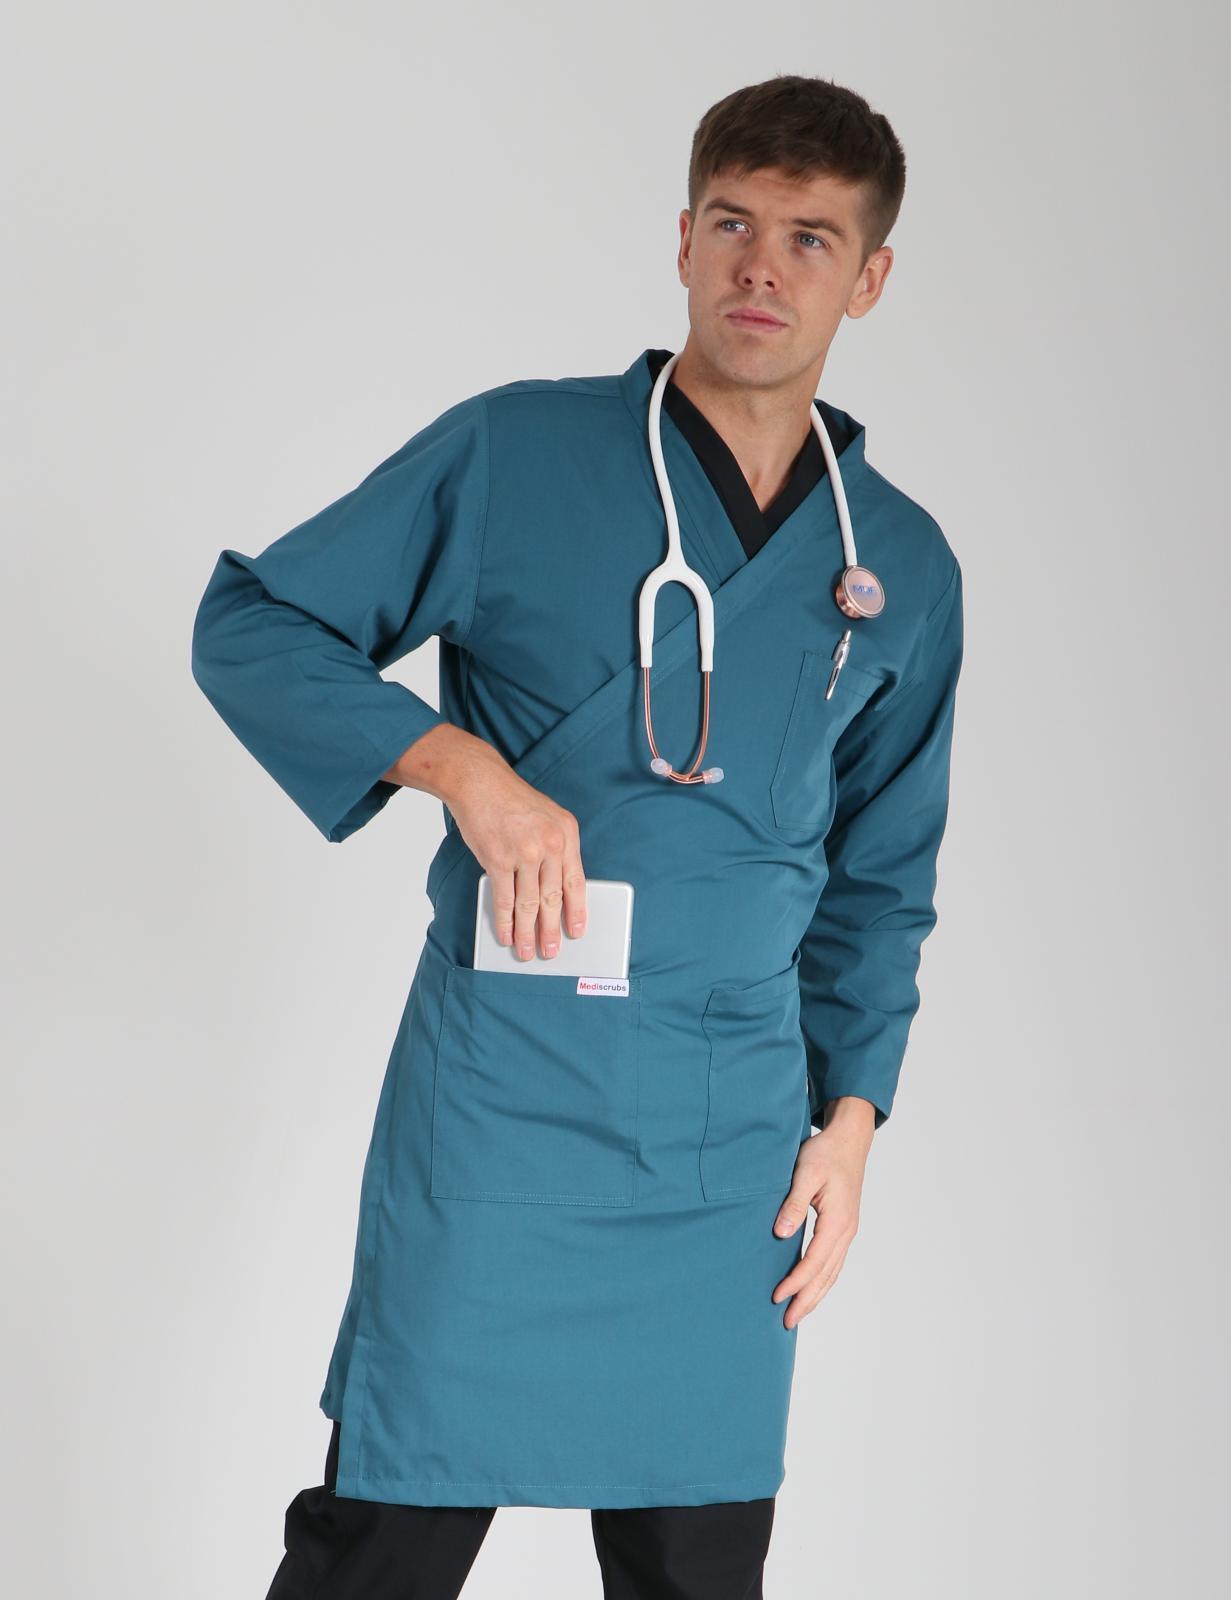 Lab Coats - Shop Our Wide Range of Quality-Made Laboratory Coats